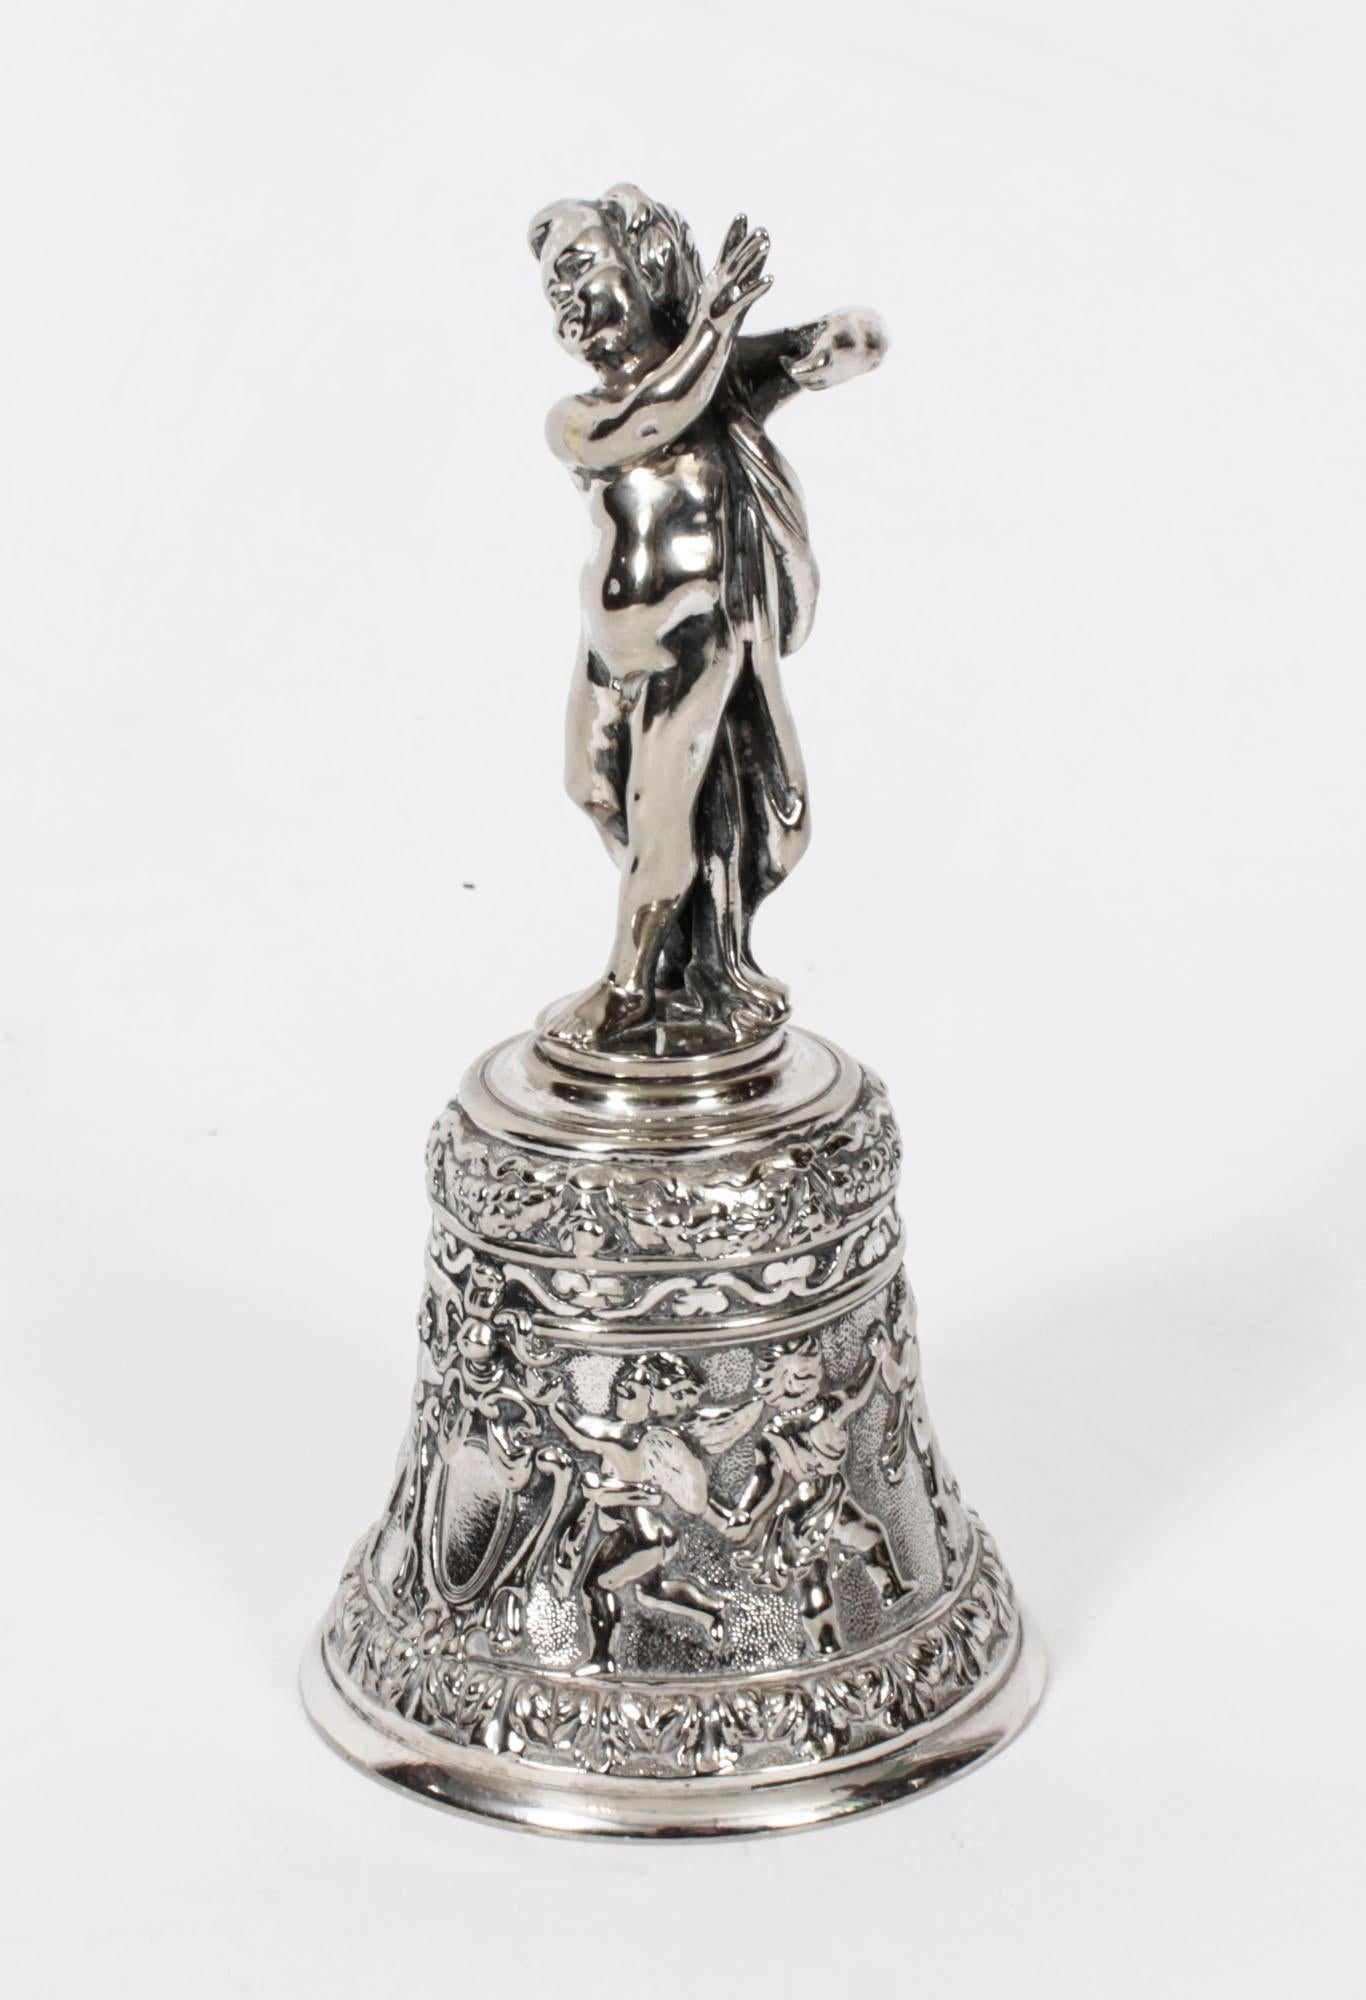 Antique Silver Plated Hand Bell Renaissance Revival 19th Century For Sale 12